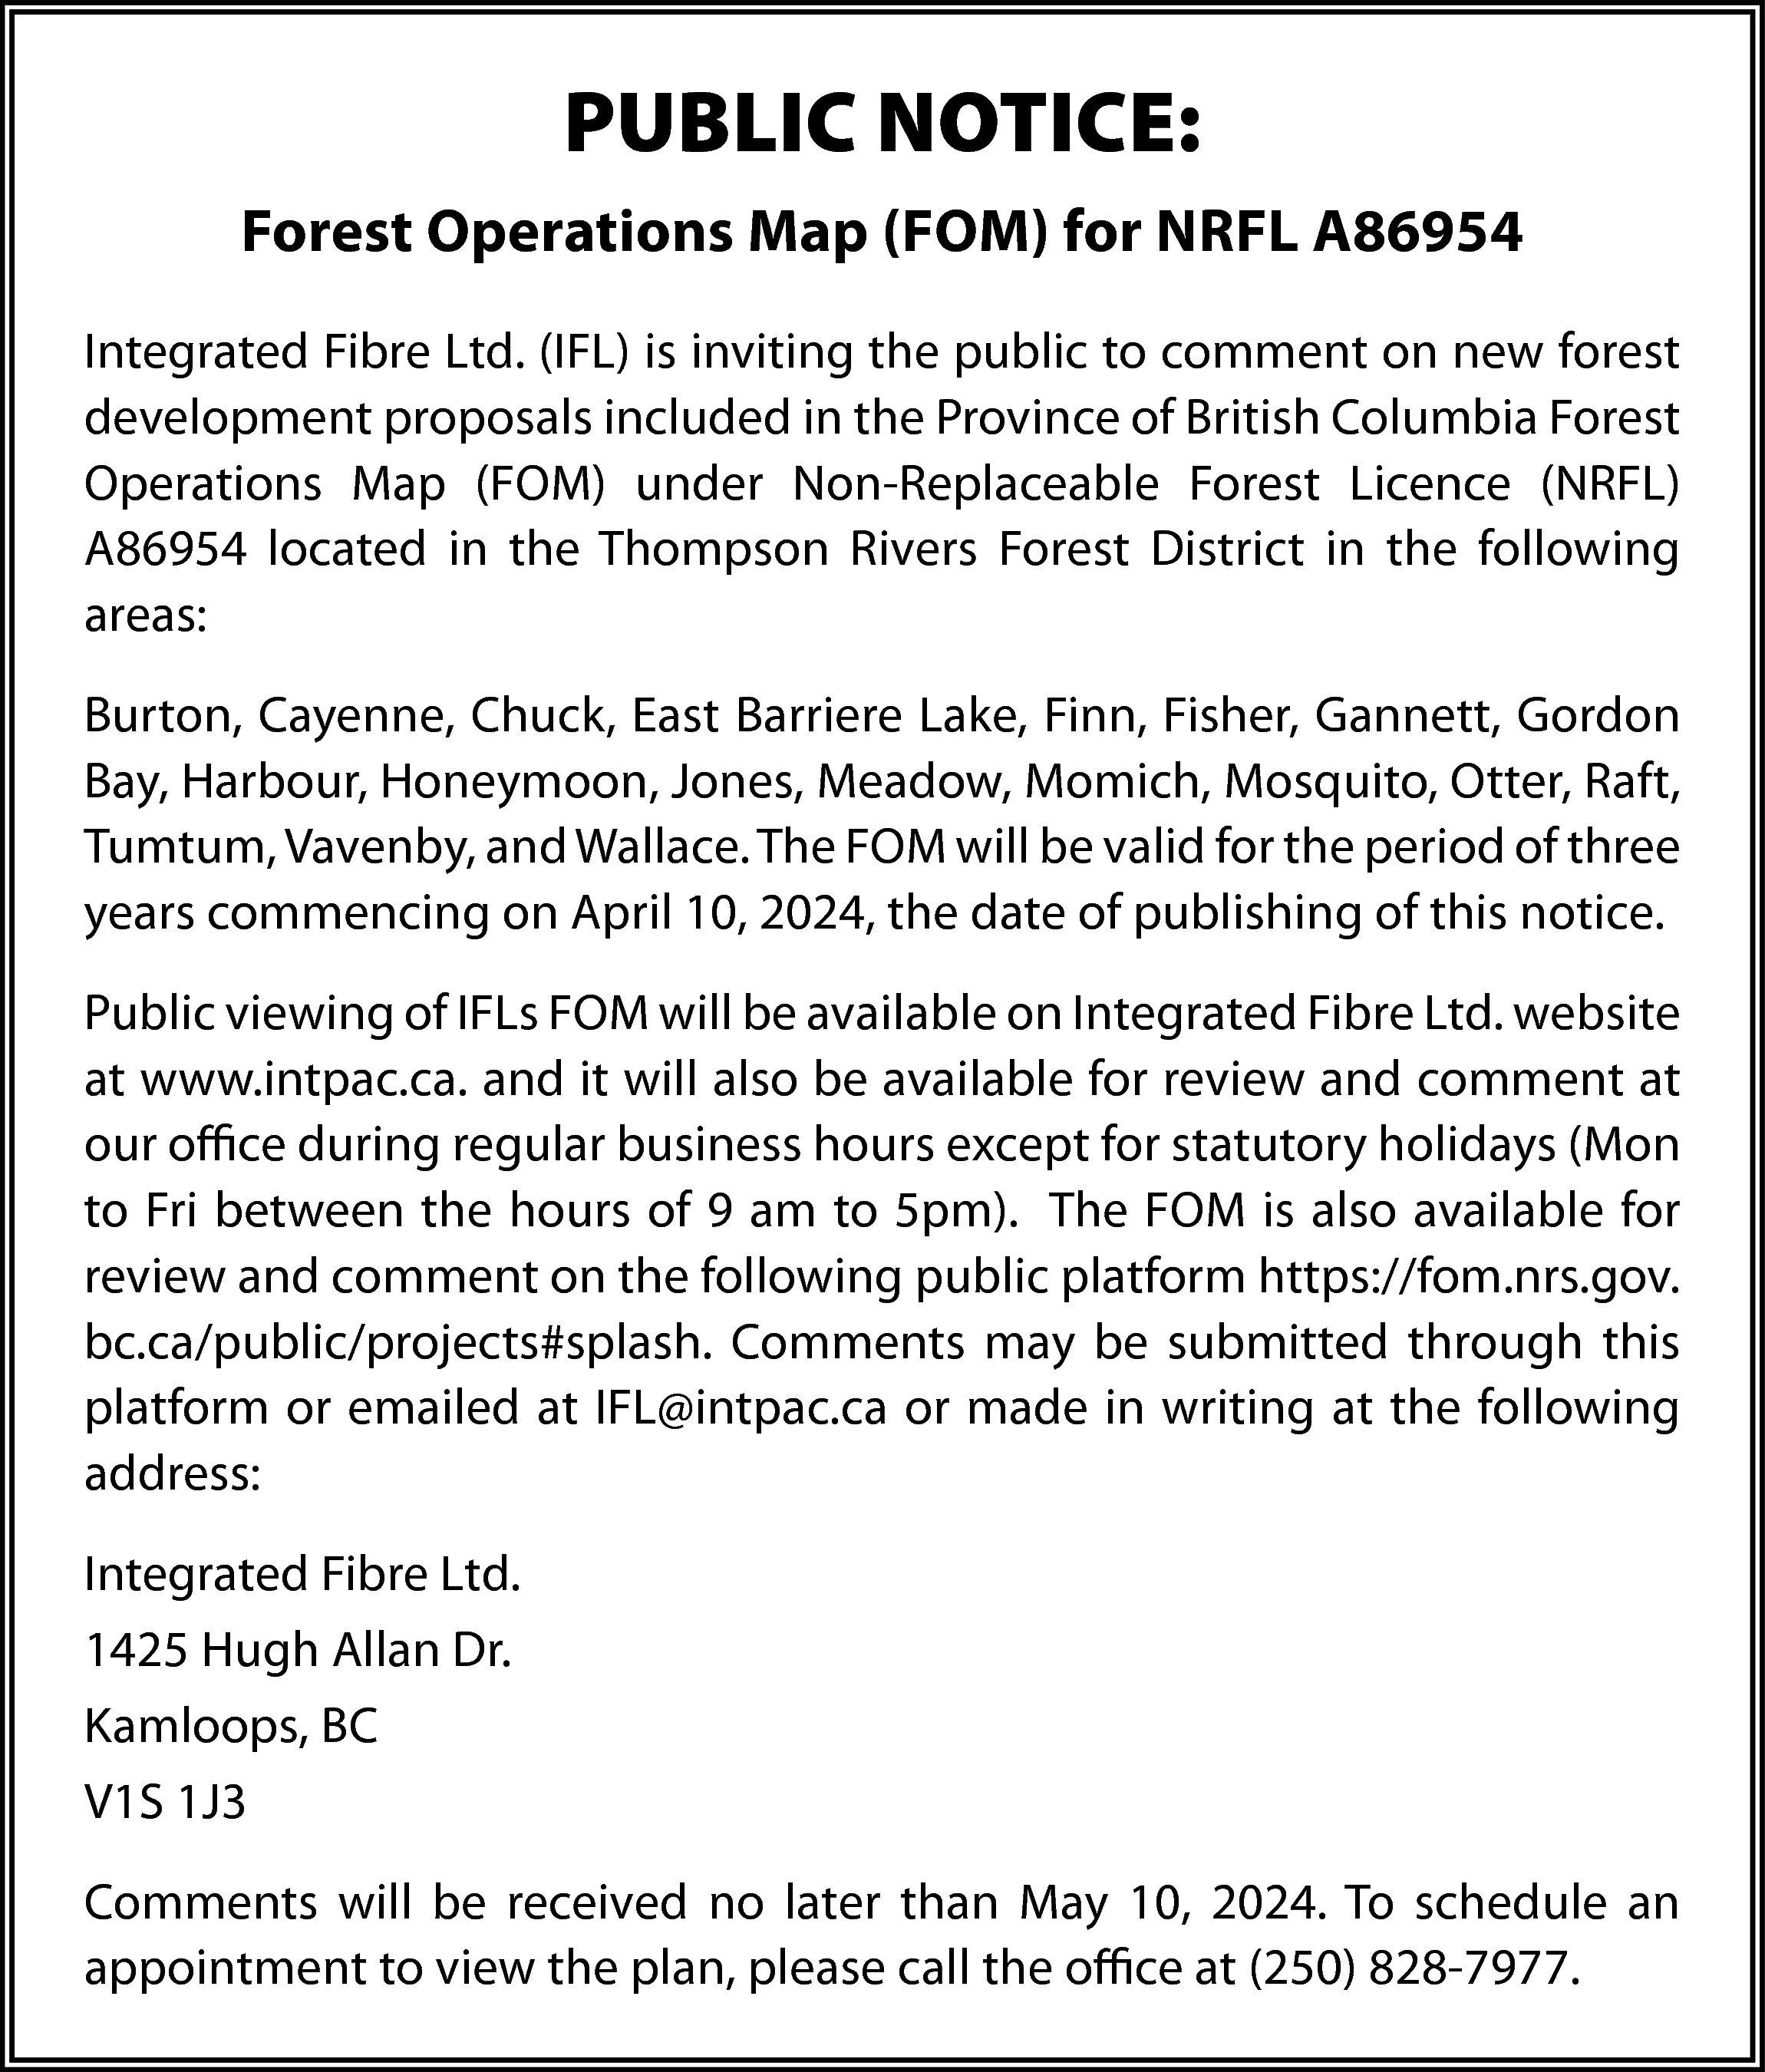 PUBLIC NOTICE: <br>Forest Operations Map  PUBLIC NOTICE:  Forest Operations Map (FOM) for NRFL A86954  Integrated Fibre Ltd. (IFL) is inviting the public to comment on new forest  development proposals included in the Province of British Columbia Forest  Operations Map (FOM) under Non-Replaceable Forest Licence (NRFL)  A86954 located in the Thompson Rivers Forest District in the following  areas:  Burton, Cayenne, Chuck, East Barriere Lake, Finn, Fisher, Gannett, Gordon  Bay, Harbour, Honeymoon, Jones, Meadow, Momich, Mosquito, Otter, Raft,  Tumtum, Vavenby, and Wallace. The FOM will be valid for the period of three  years commencing on April 10, 2024, the date of publishing of this notice.  Public viewing of IFLs FOM will be available on Integrated Fibre Ltd. website  at www.intpac.ca. and it will also be available for review and comment at  our office during regular business hours except for statutory holidays (Mon  to Fri between the hours of 9 am to 5pm). The FOM is also available for  review and comment on the following public platform https://fom.nrs.gov.  bc.ca/public/projects#splash. Comments may be submitted through this  platform or emailed at IFL@intpac.ca or made in writing at the following  address:  Integrated Fibre Ltd.  1425 Hugh Allan Dr.  Kamloops, BC  V1S 1J3  Comments will be received no later than May 10, 2024. To schedule an  appointment to view the plan, please call the office at (250) 828-7977.    